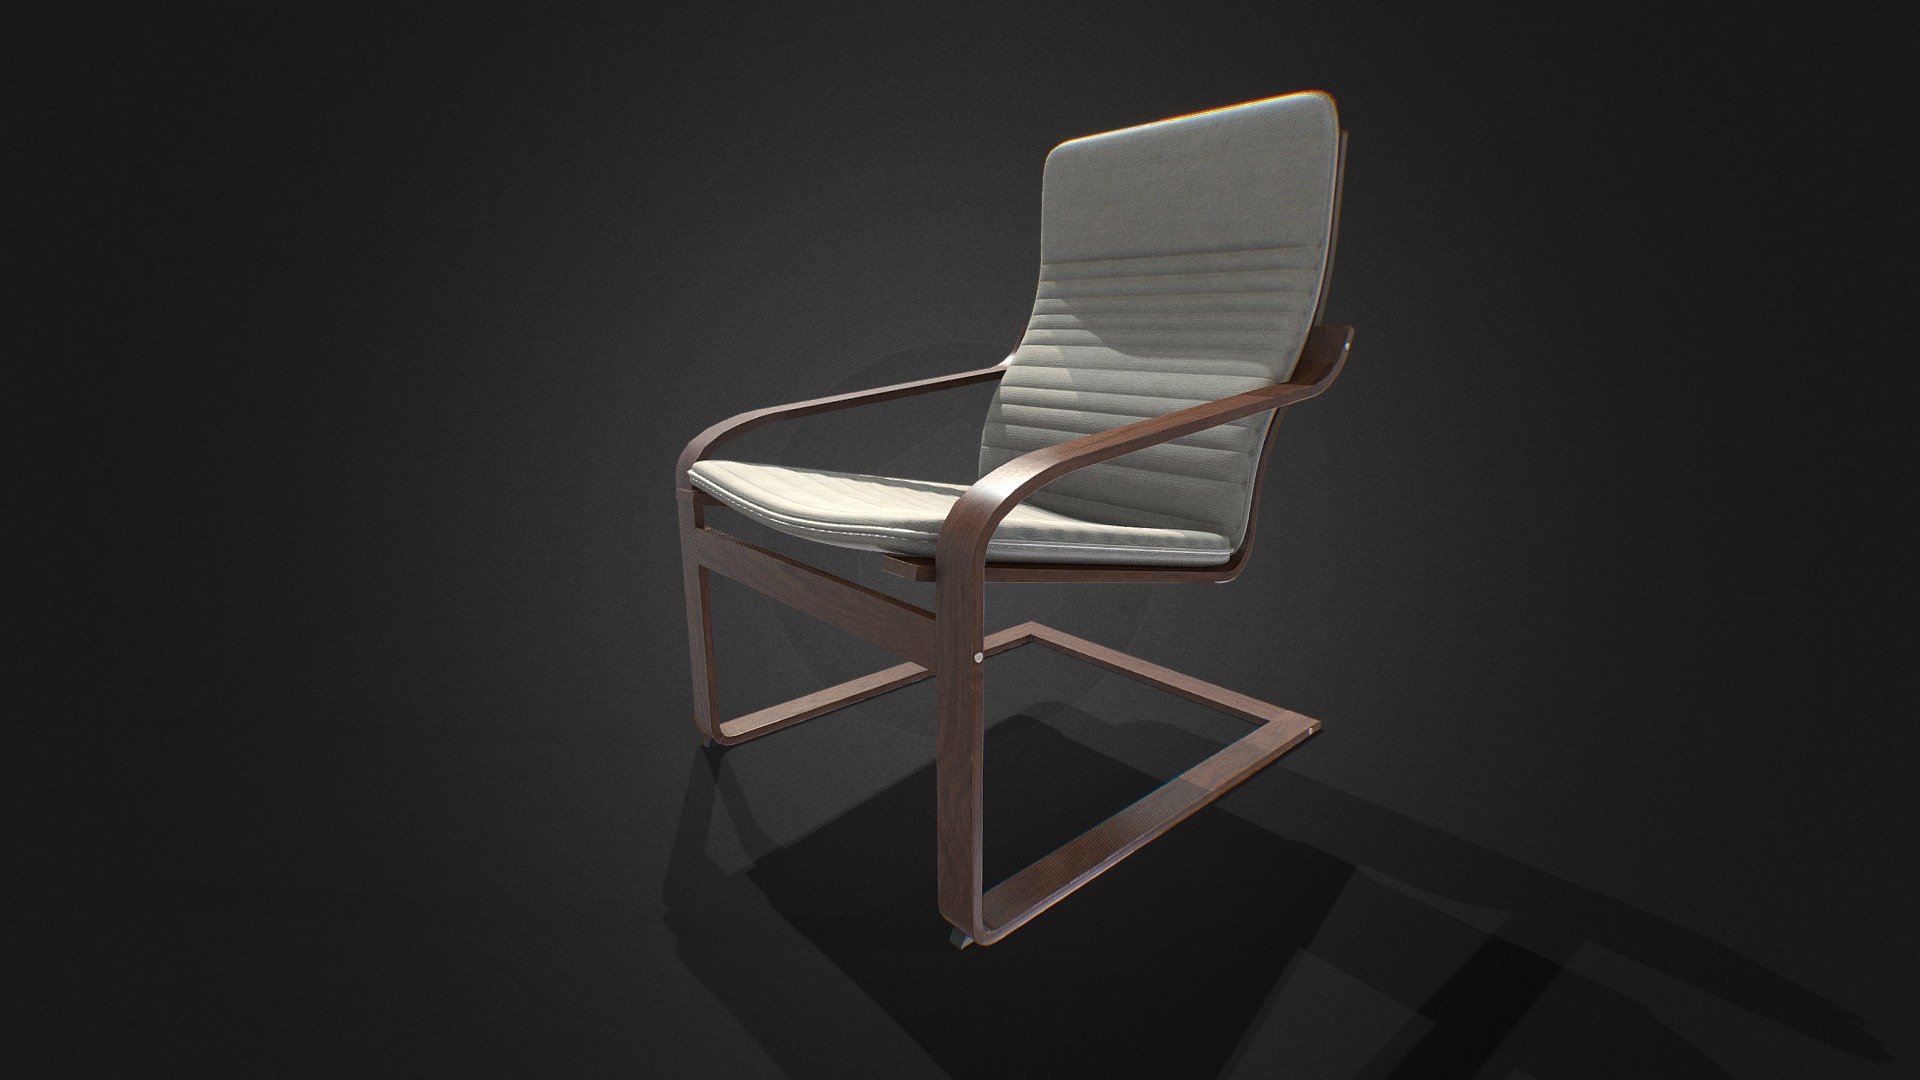 3d model of a arm-chair for using as a resting furniture in arch-viz. This model was created in latest version of Blender and textured in Substance Painter. This model is made in real proportions.

High resolution of textures.

Metal-ness workflow- Base Color, Normal, Metal-ness, Ambient Occlusion and Roughness Textures - PNG 3d model